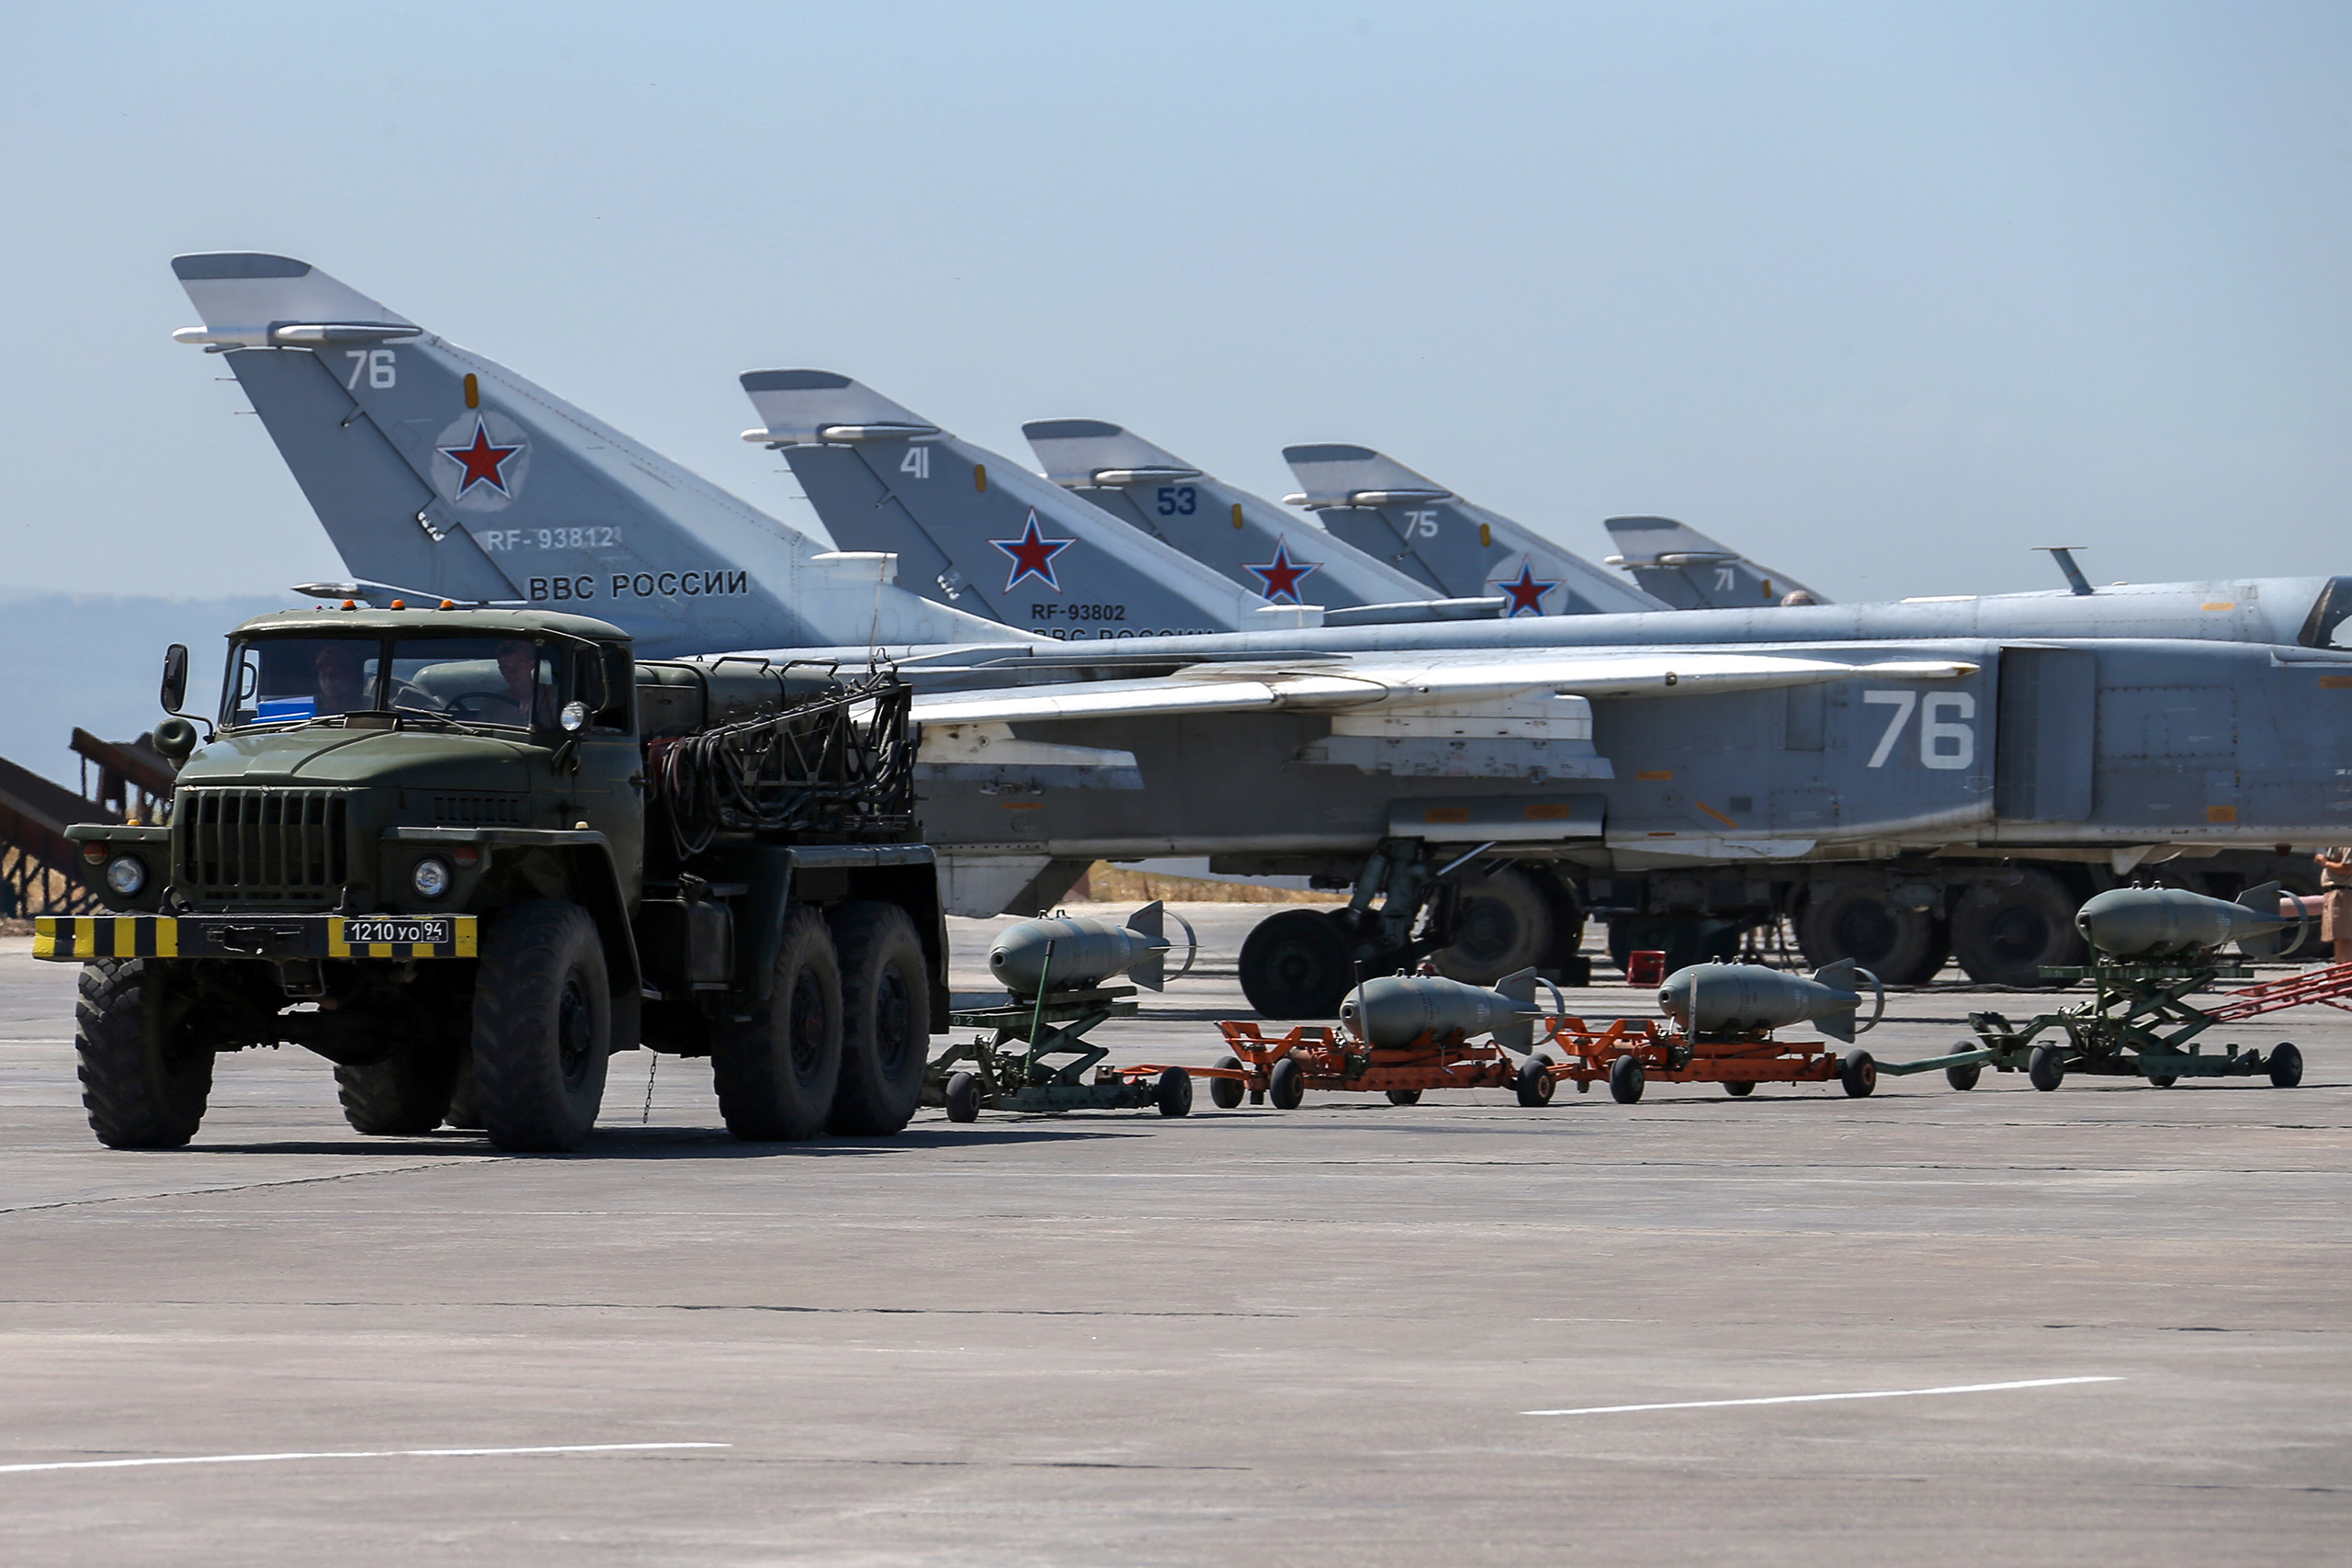 Russian fighter jets and bombers are parked at Hemeimeem air base in Syria on June 18, 2016. (Vadim Savitsky—Russian Defense Ministry Press Service/AP)